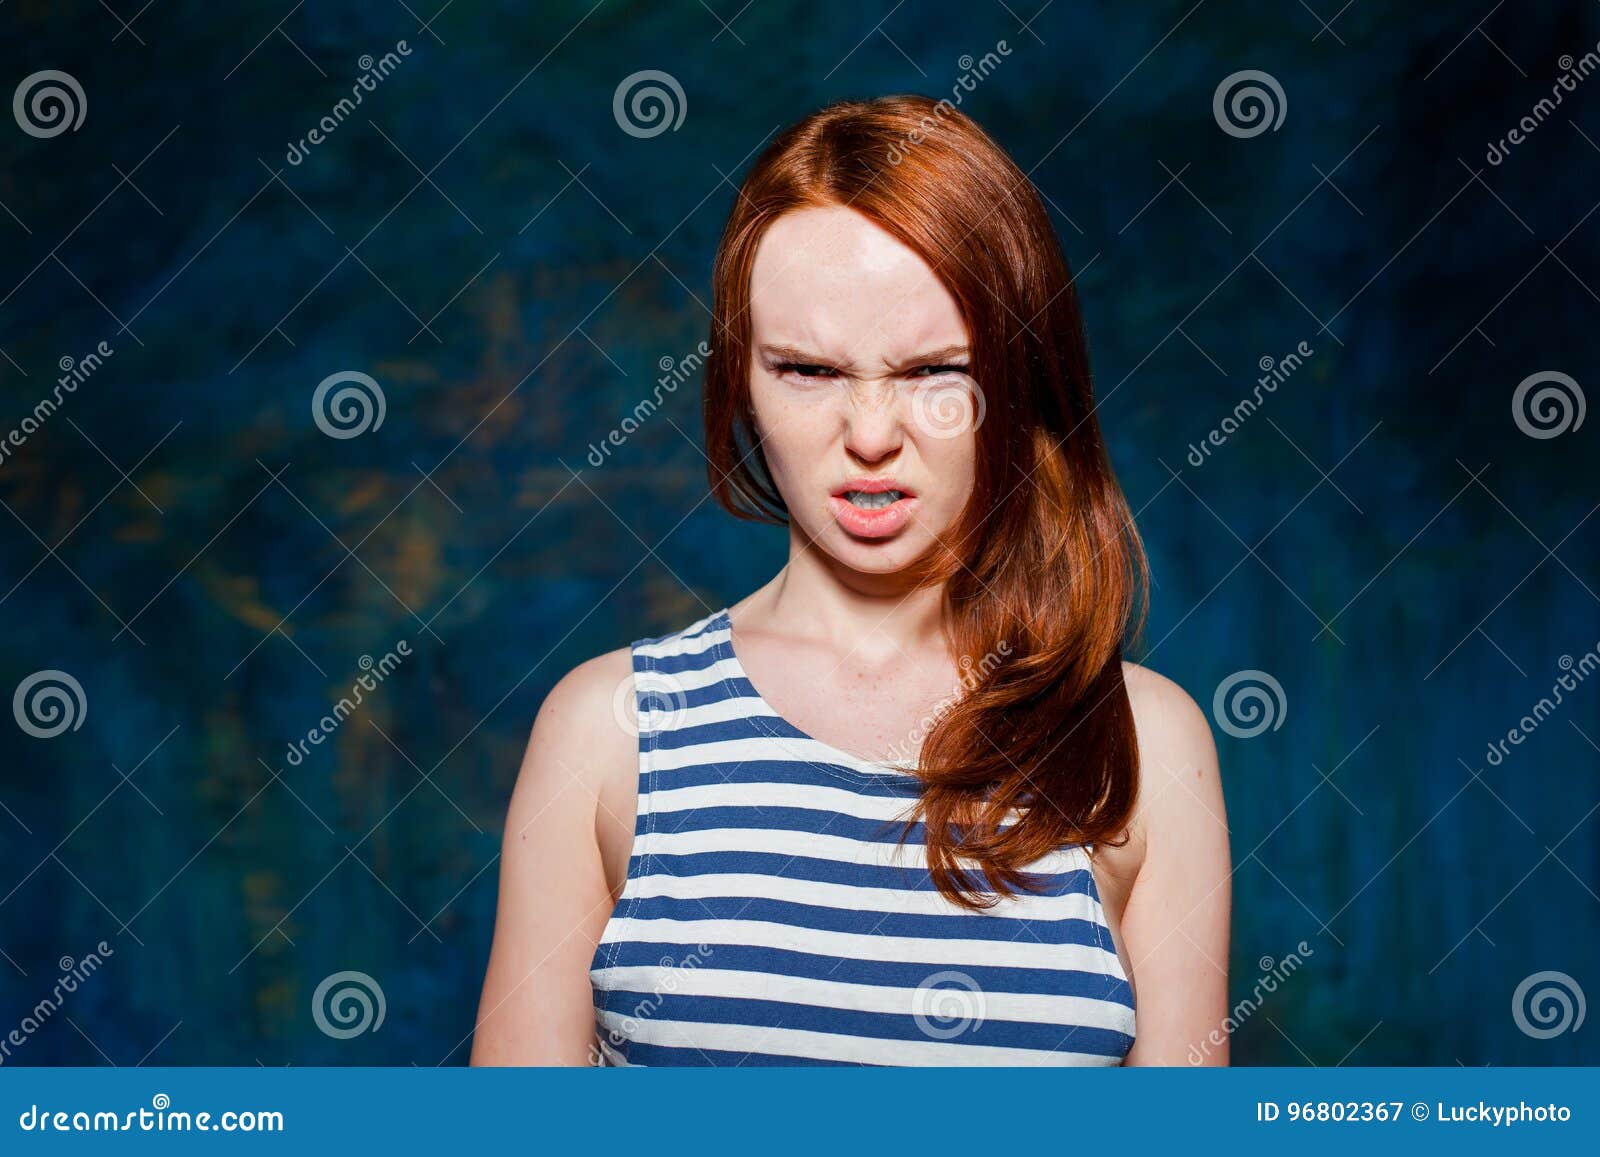 Angry Redhead Girl Stock Image Image Of Grin Anger 96802367